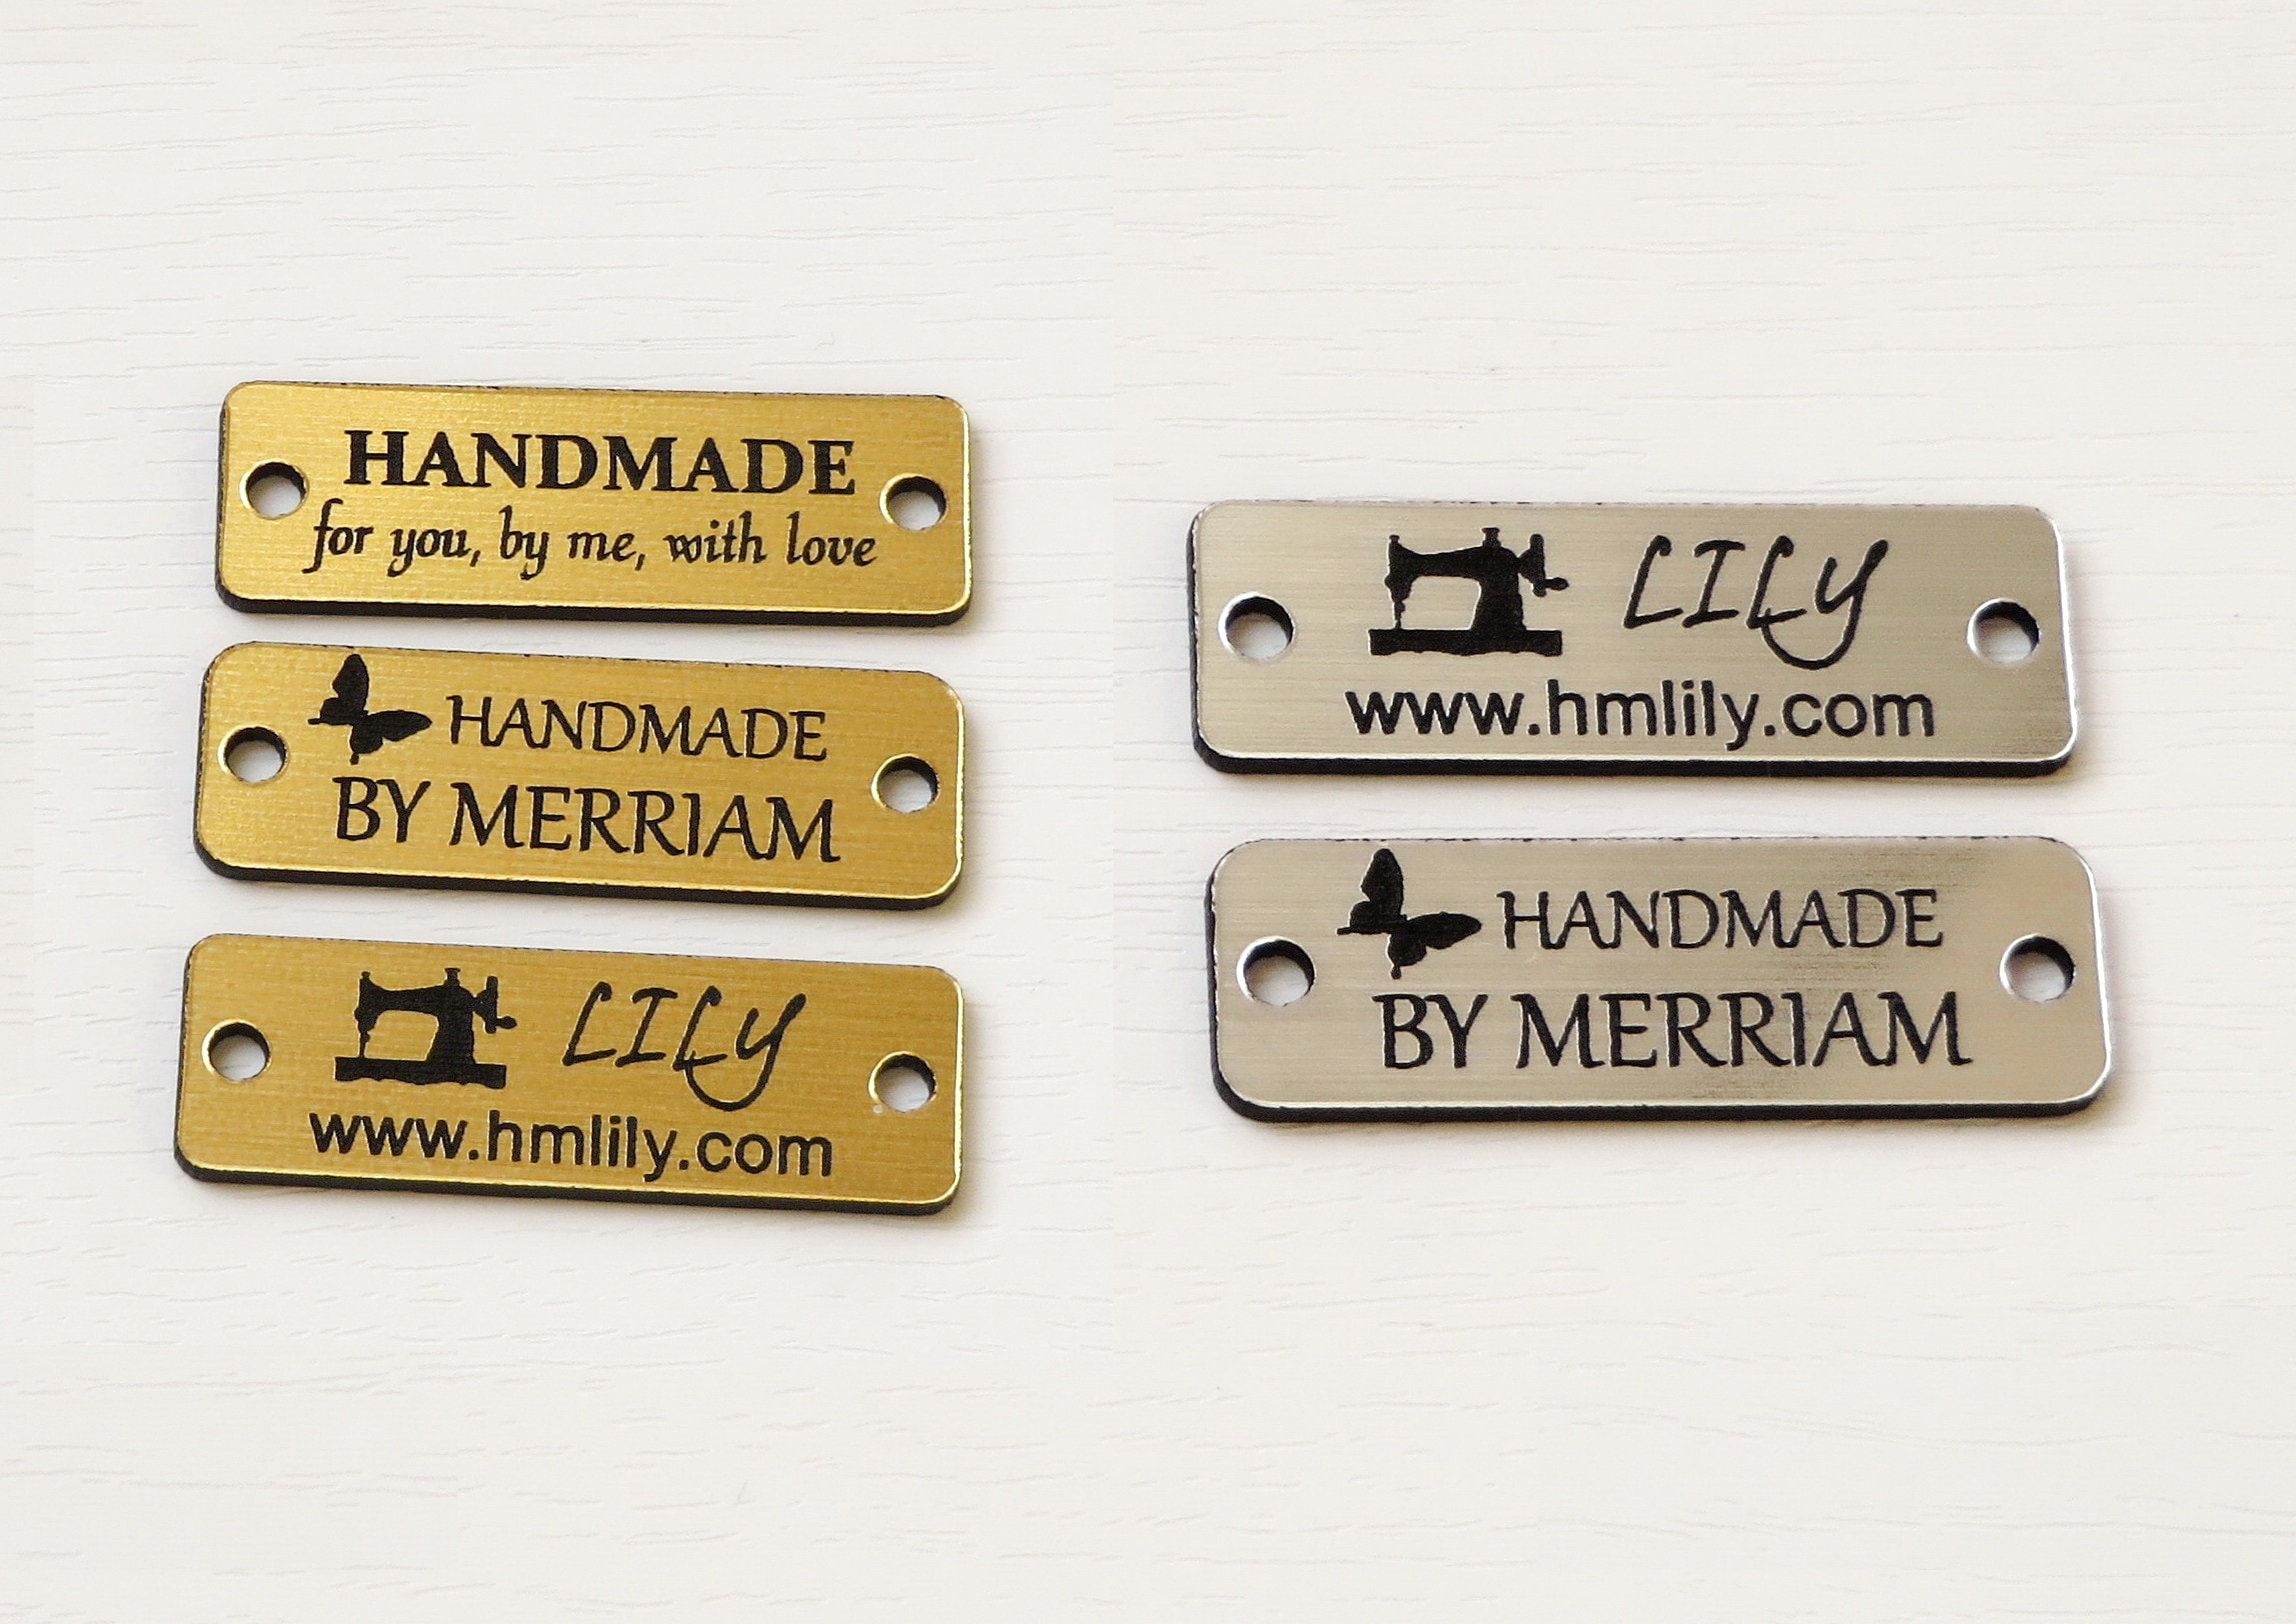 Custom Metal labels & tags for clothing line